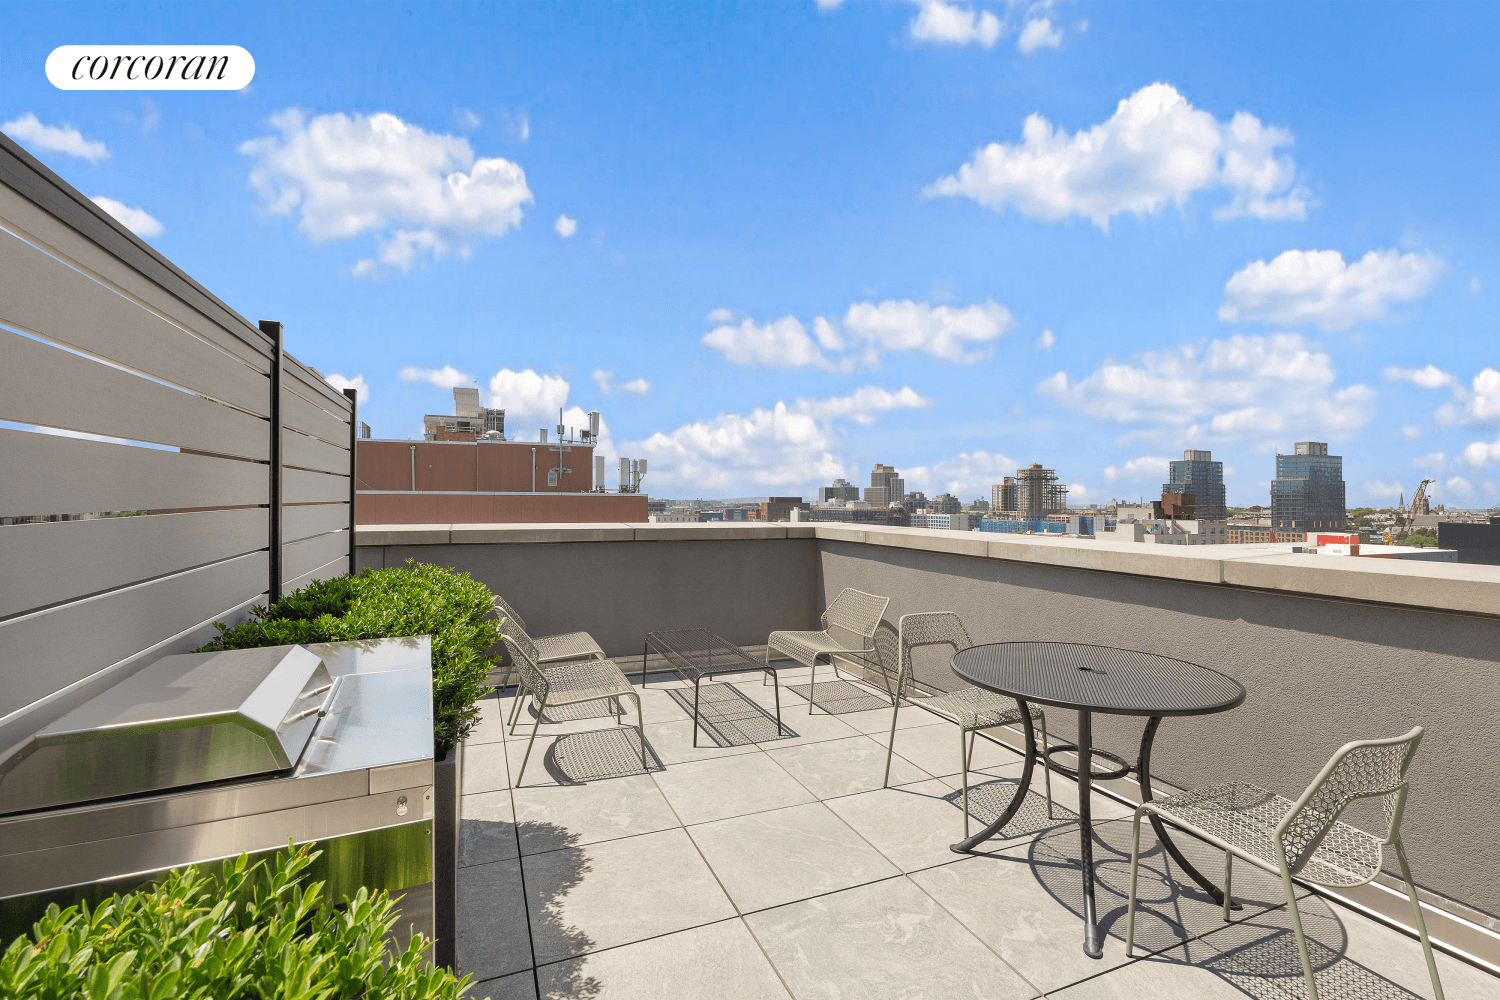 Immediate Closings 50 SoldModel Residence 6A at 601 BalticThree Bedrooms Private Terrace of 191 Square FeetThoughtfully designed, meticulously executed.